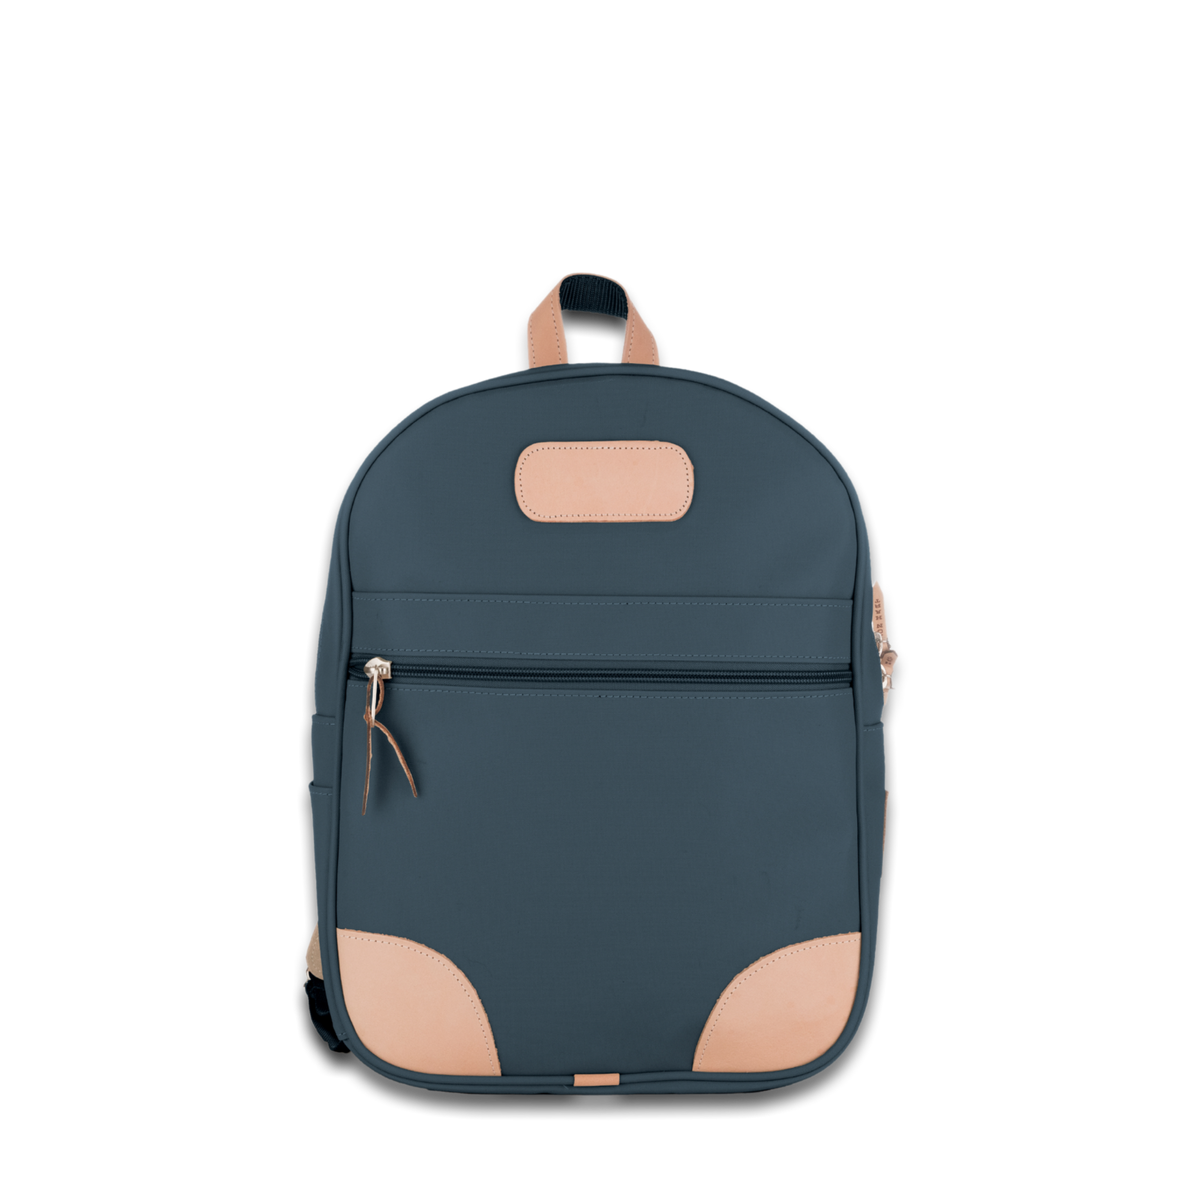 Clear Backpack- with Pencil Pouch Black Trim